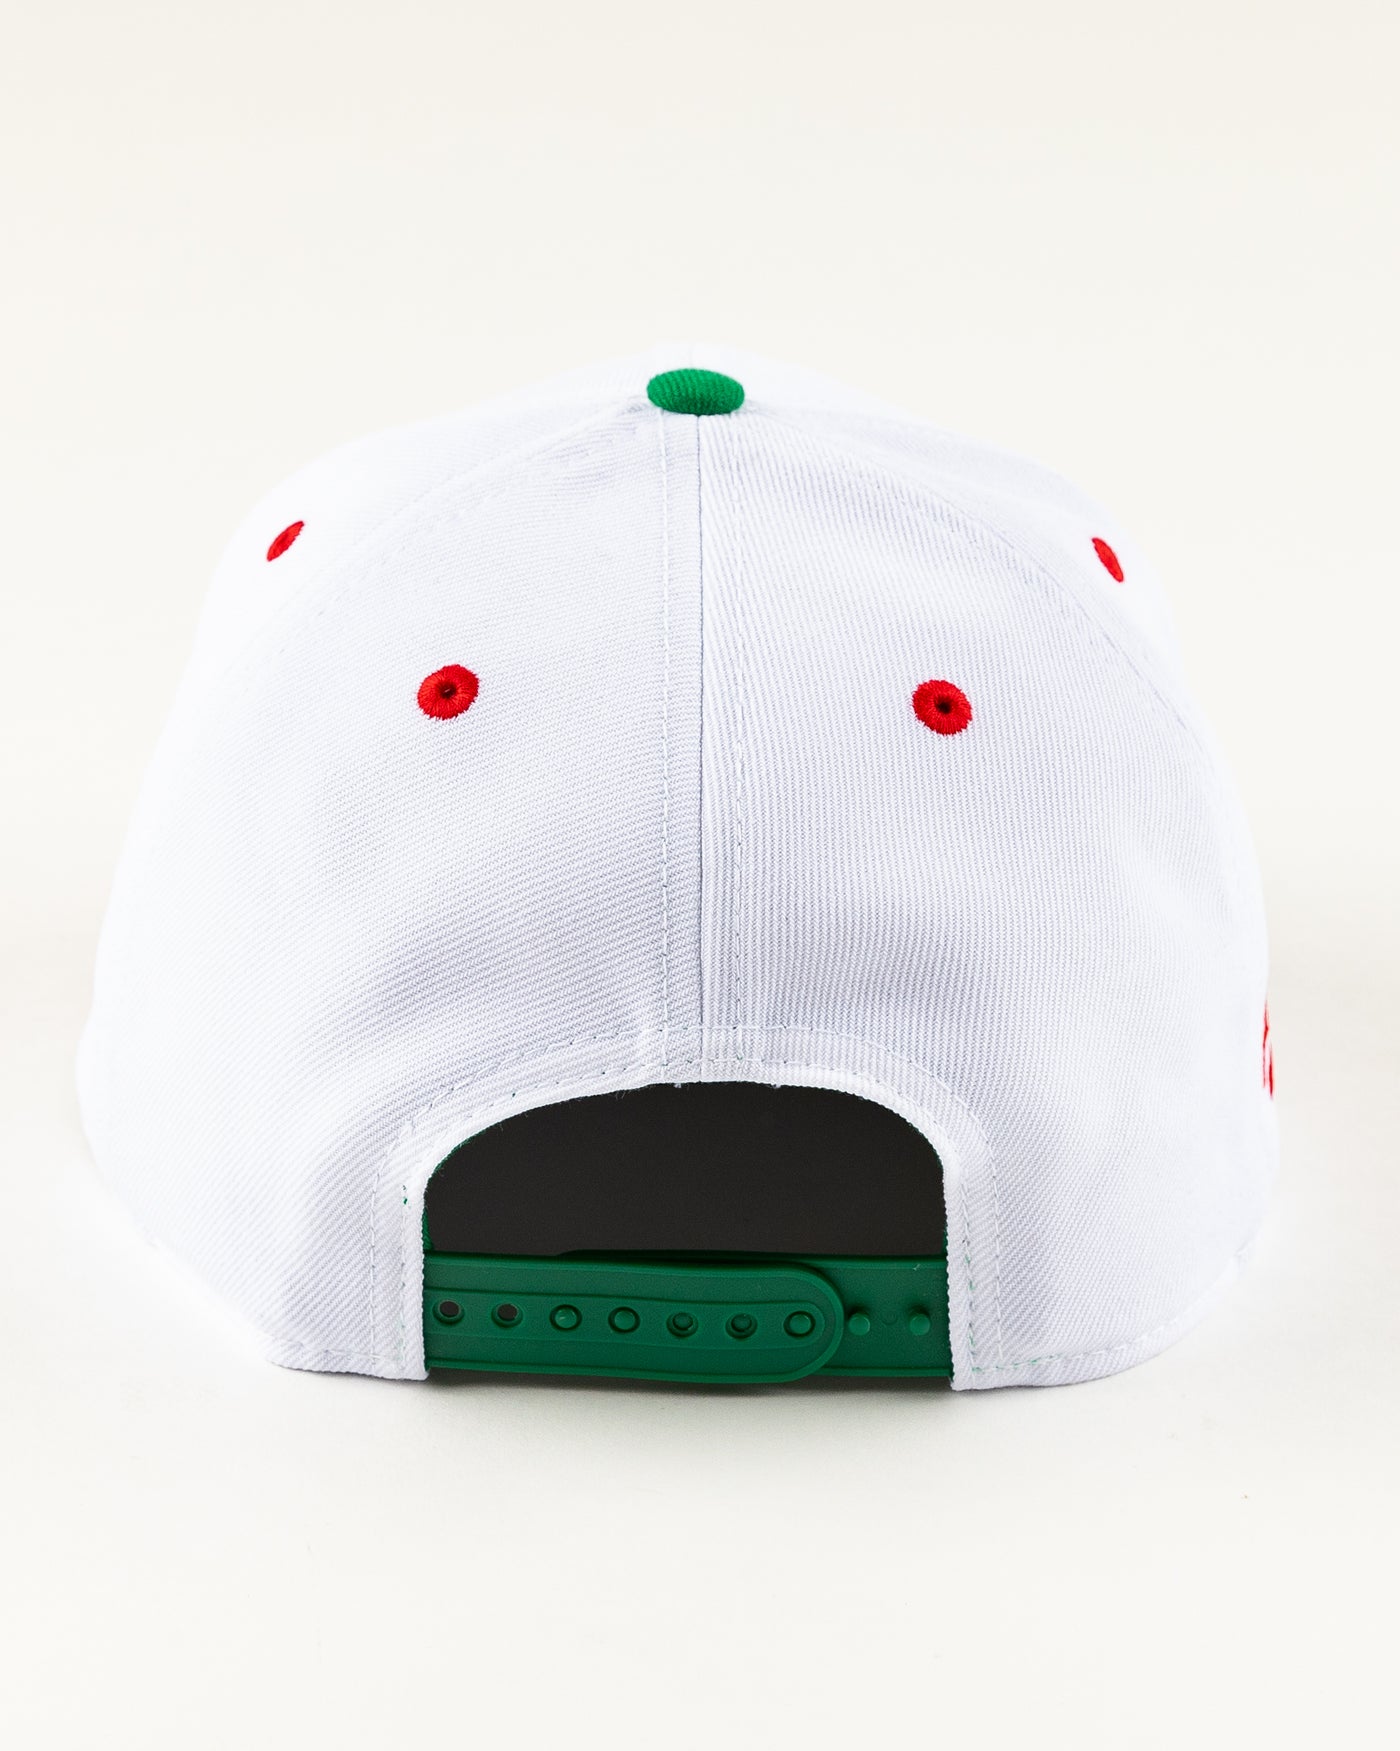 white and red New Era snapback with Chicago Blackhawks wordmark and deep dish pizza design - back lay flat